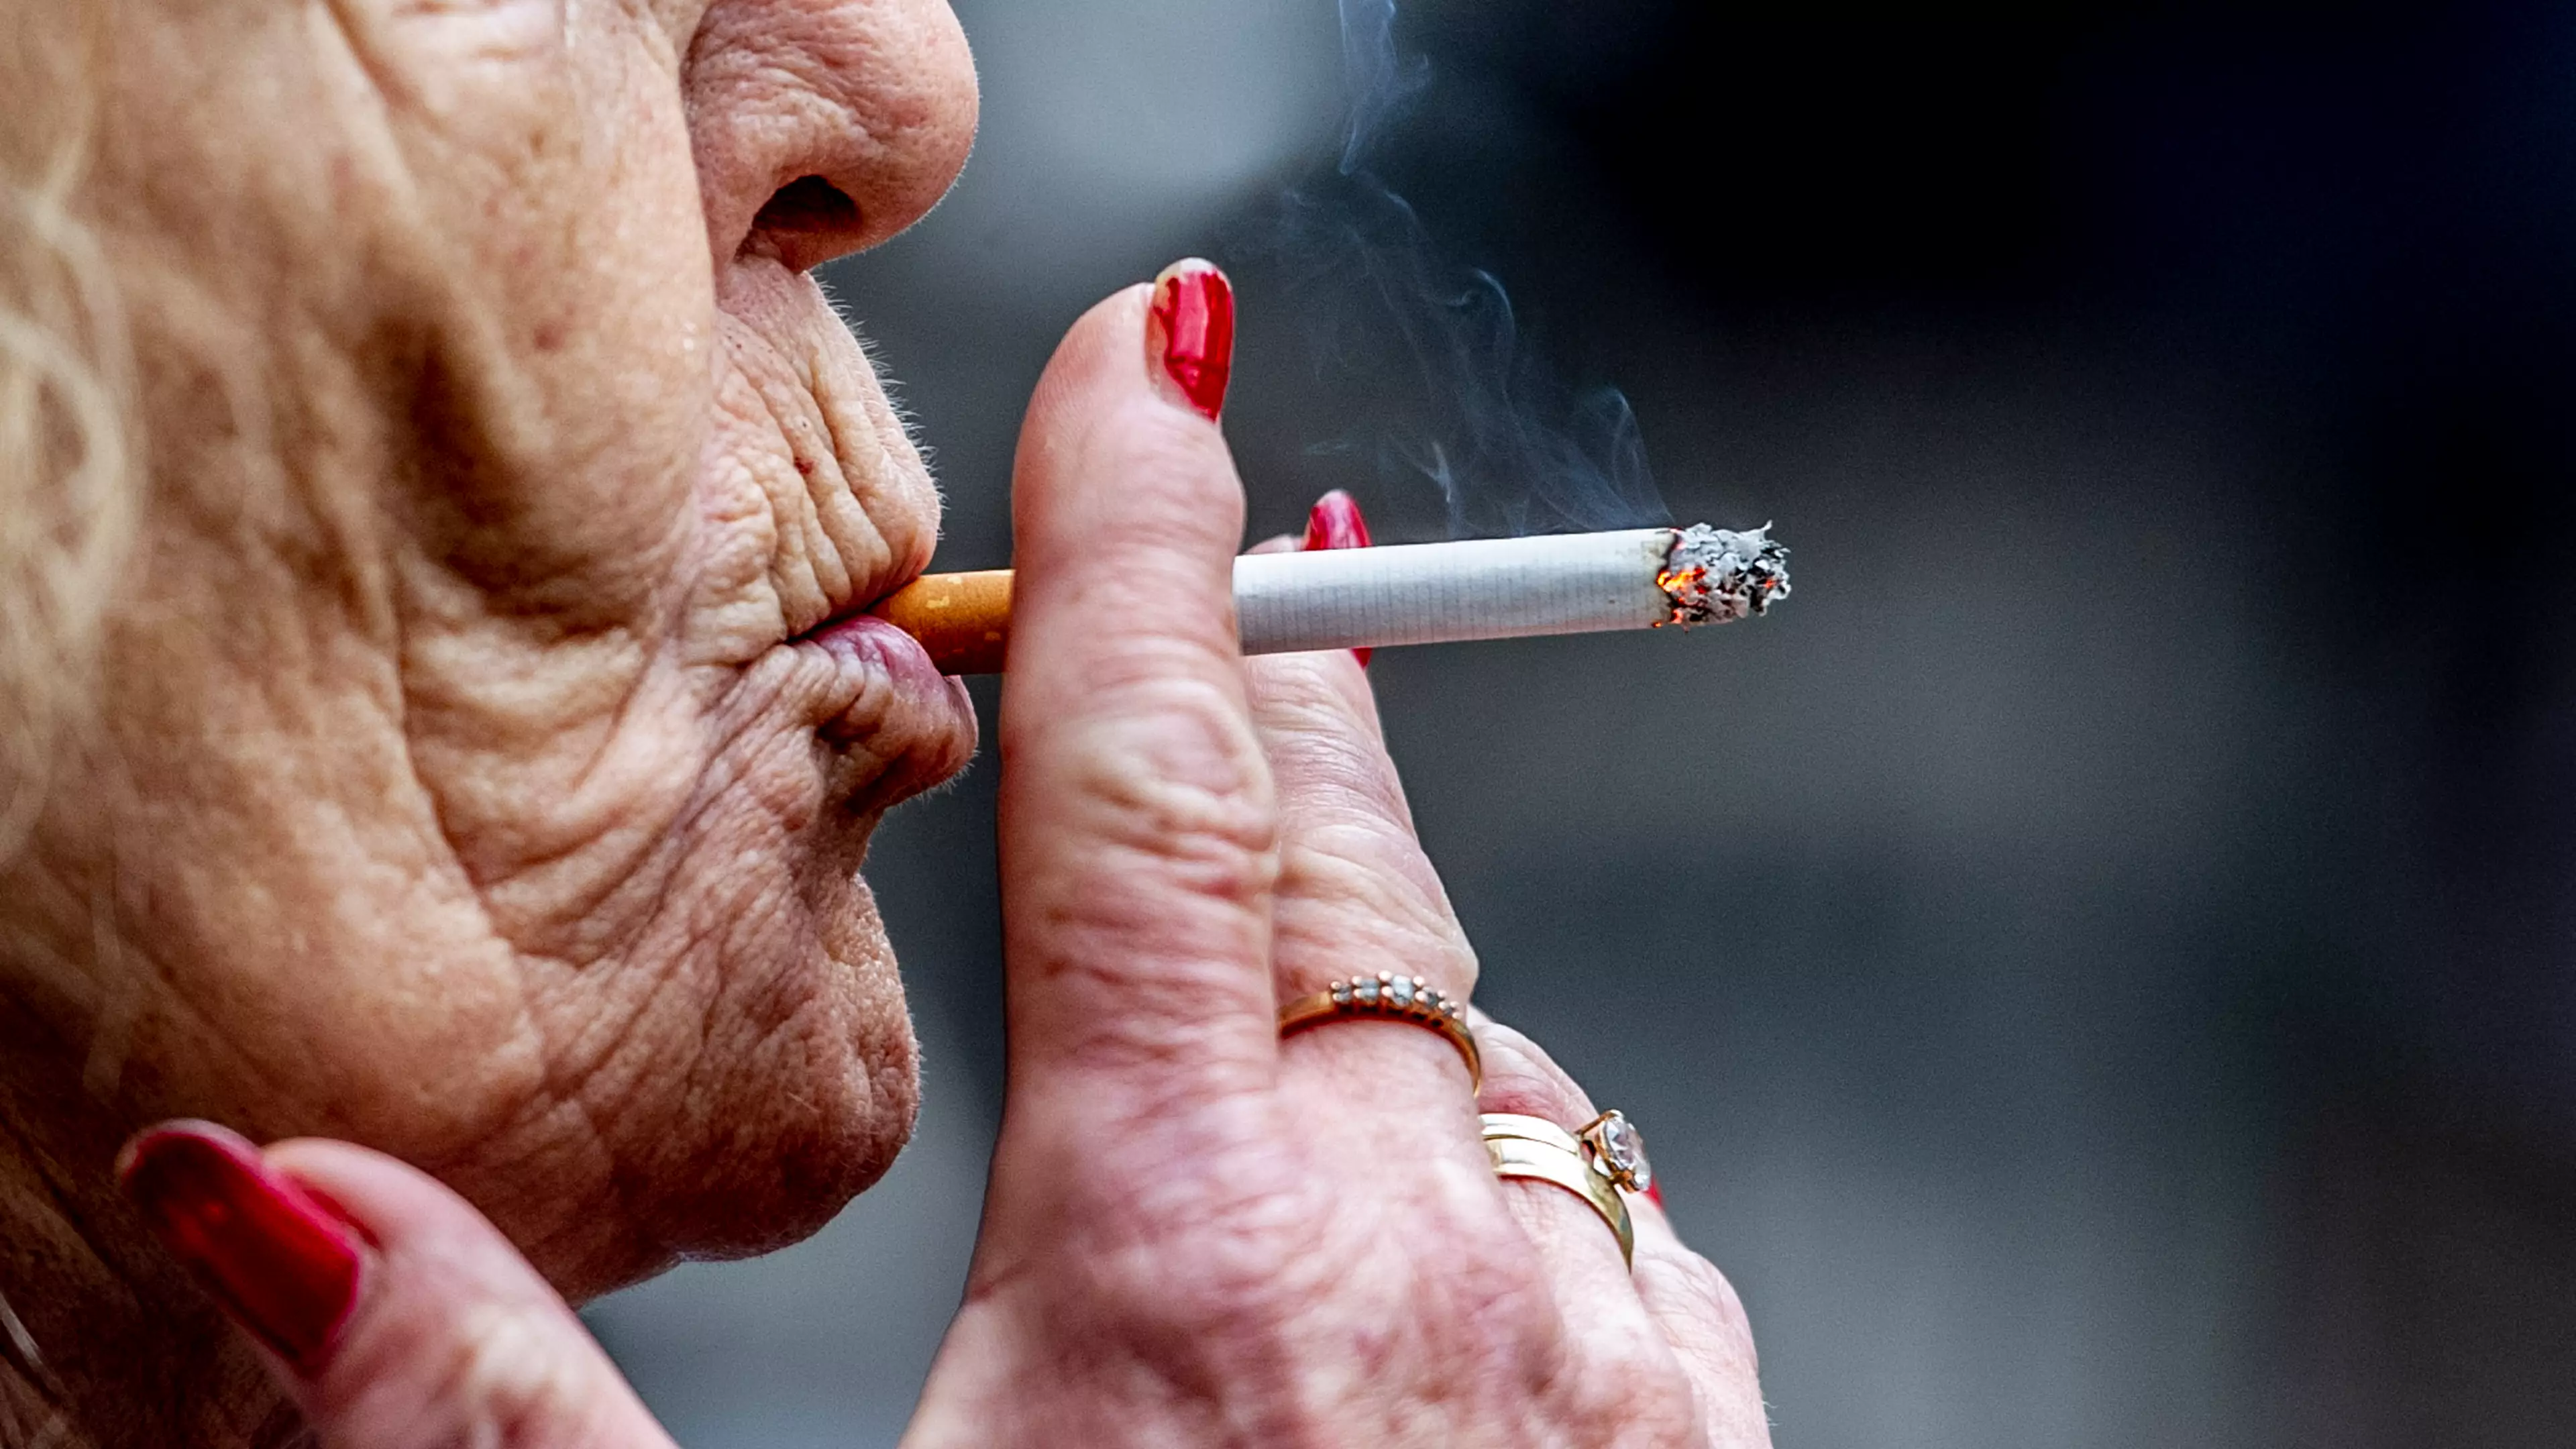 The Risk Of Heart Disease Lingers 15 Years After Quitting Smoking